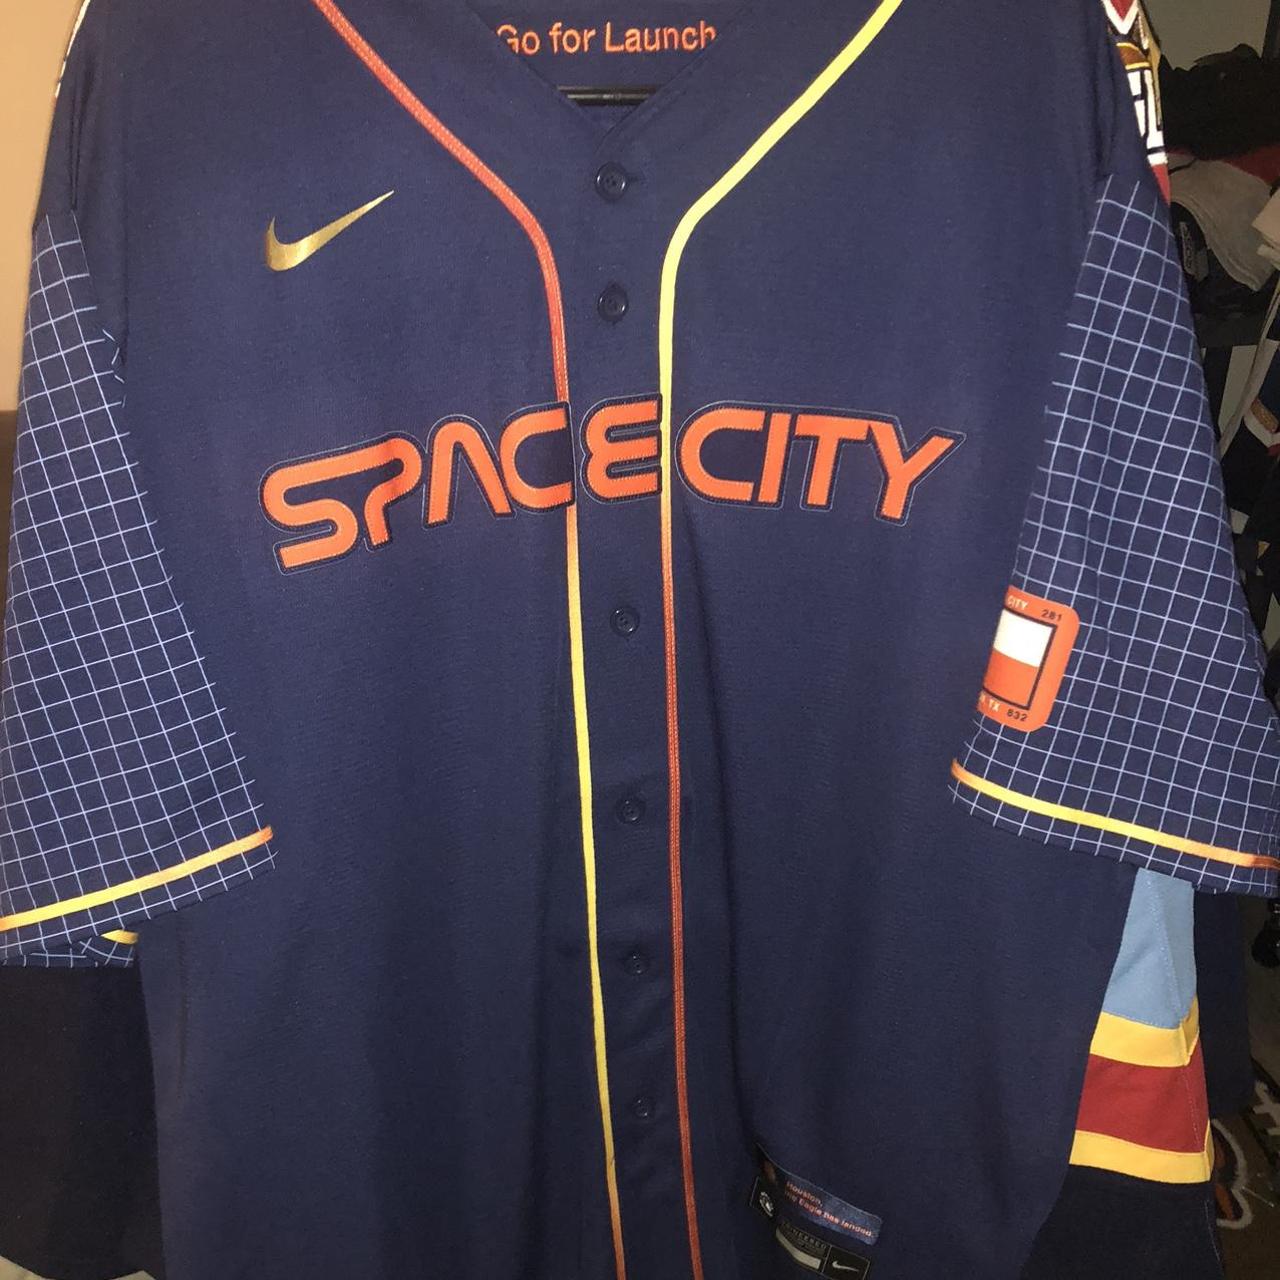 nike astros space city jersey